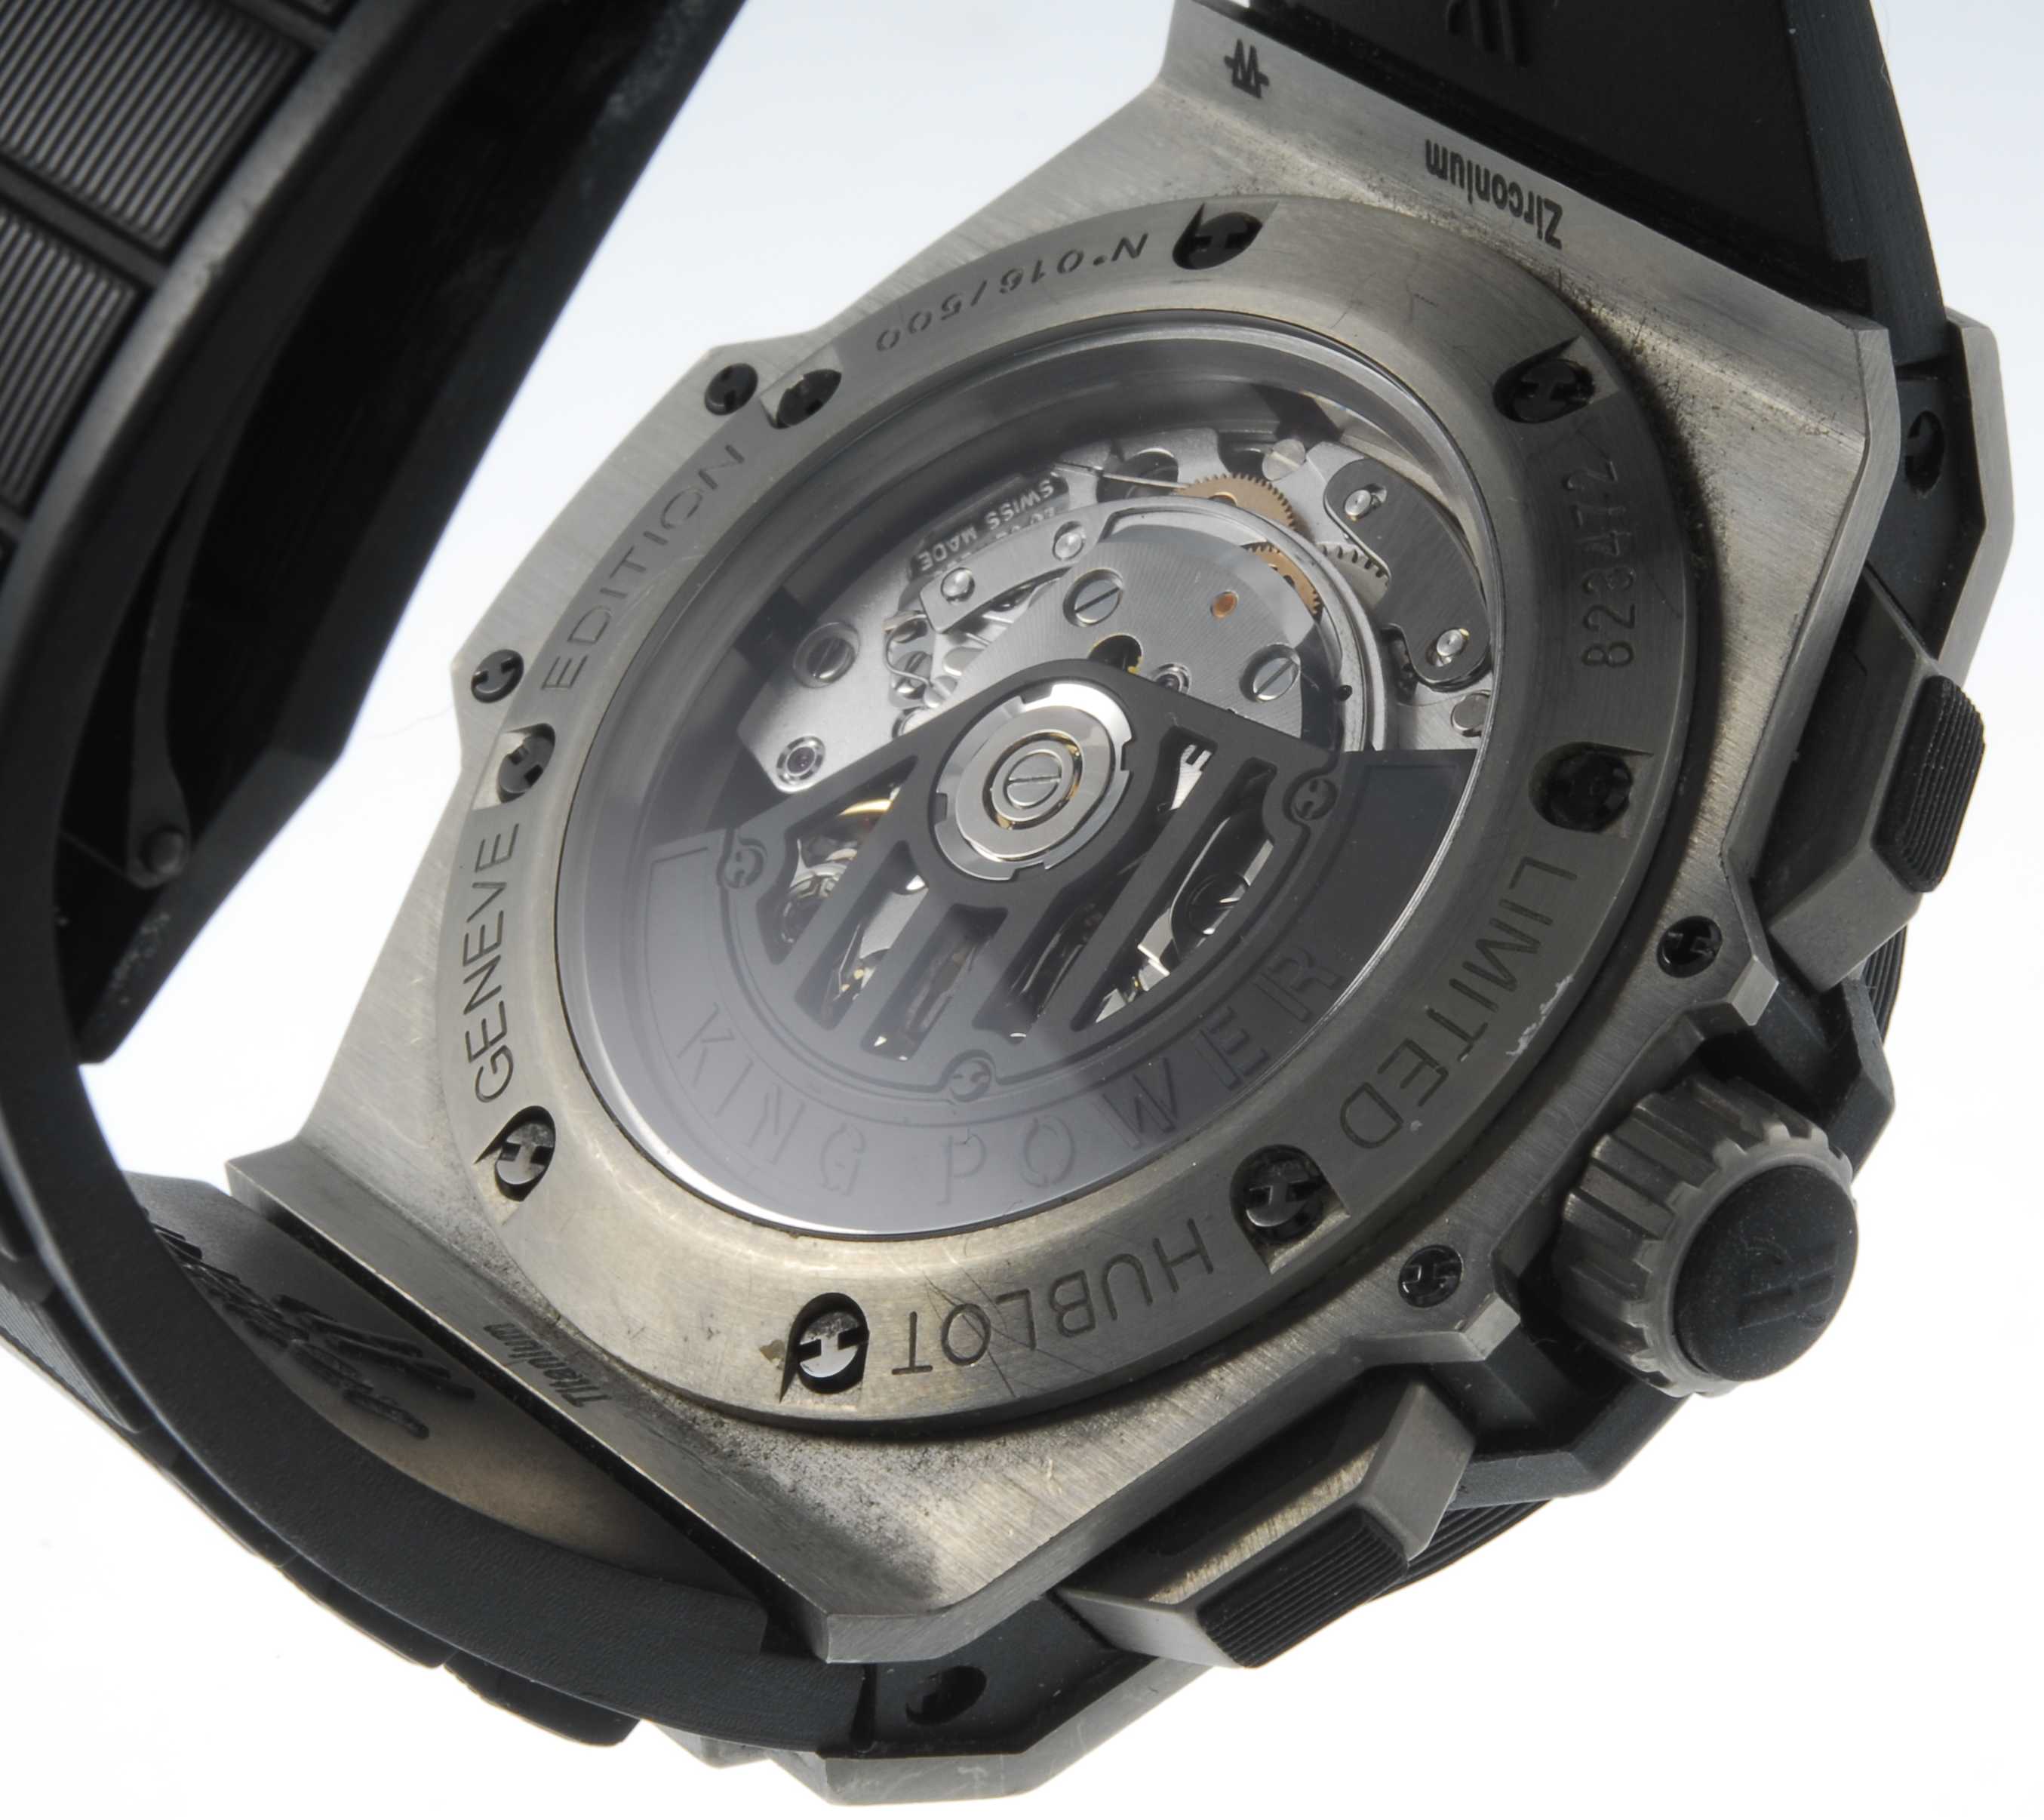 HUBLOT - a limited edition gentleman's King Power chronograph wrist watch. Number 16 of 500. - Image 2 of 4